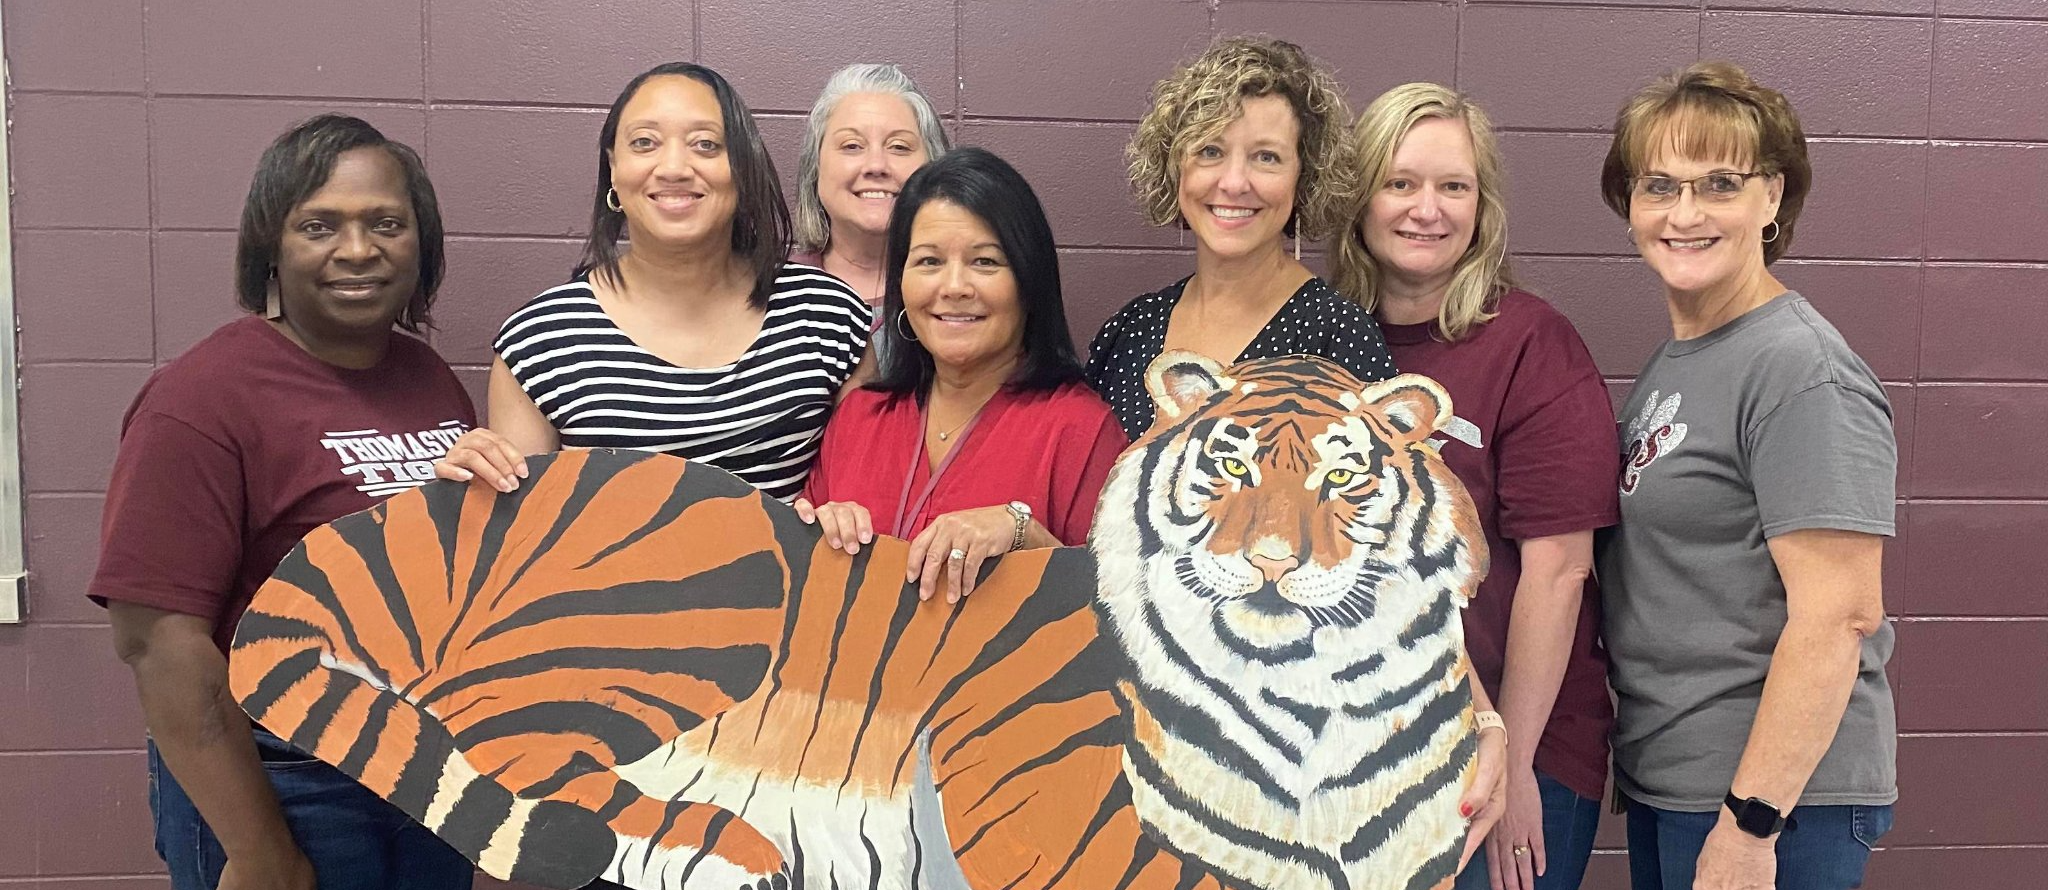 Faculty and staff at TMS with 25-plus years in education